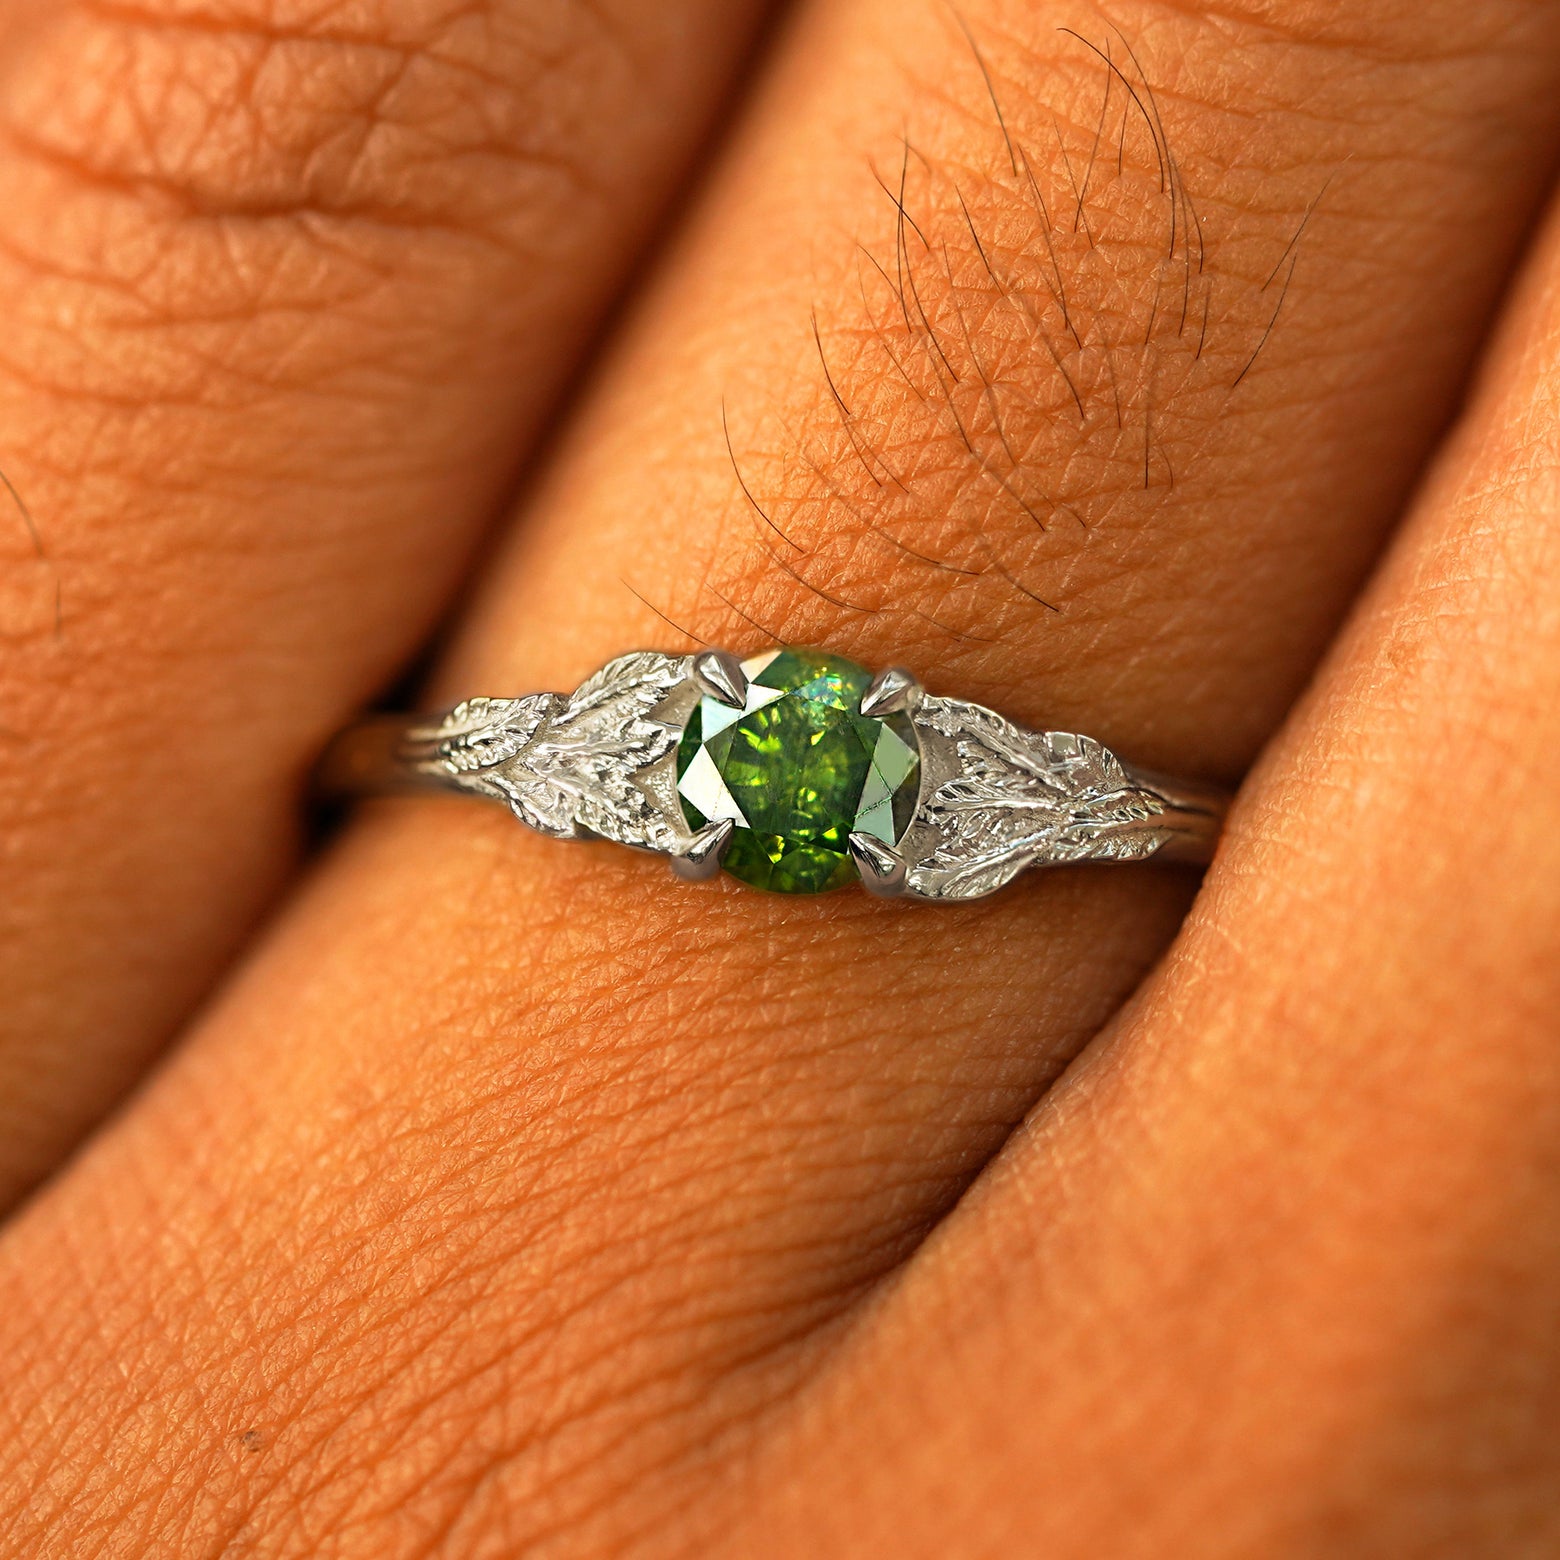 Close up view of a model's fingers wearing a 14k white gold Green Diamond Leaves Ring